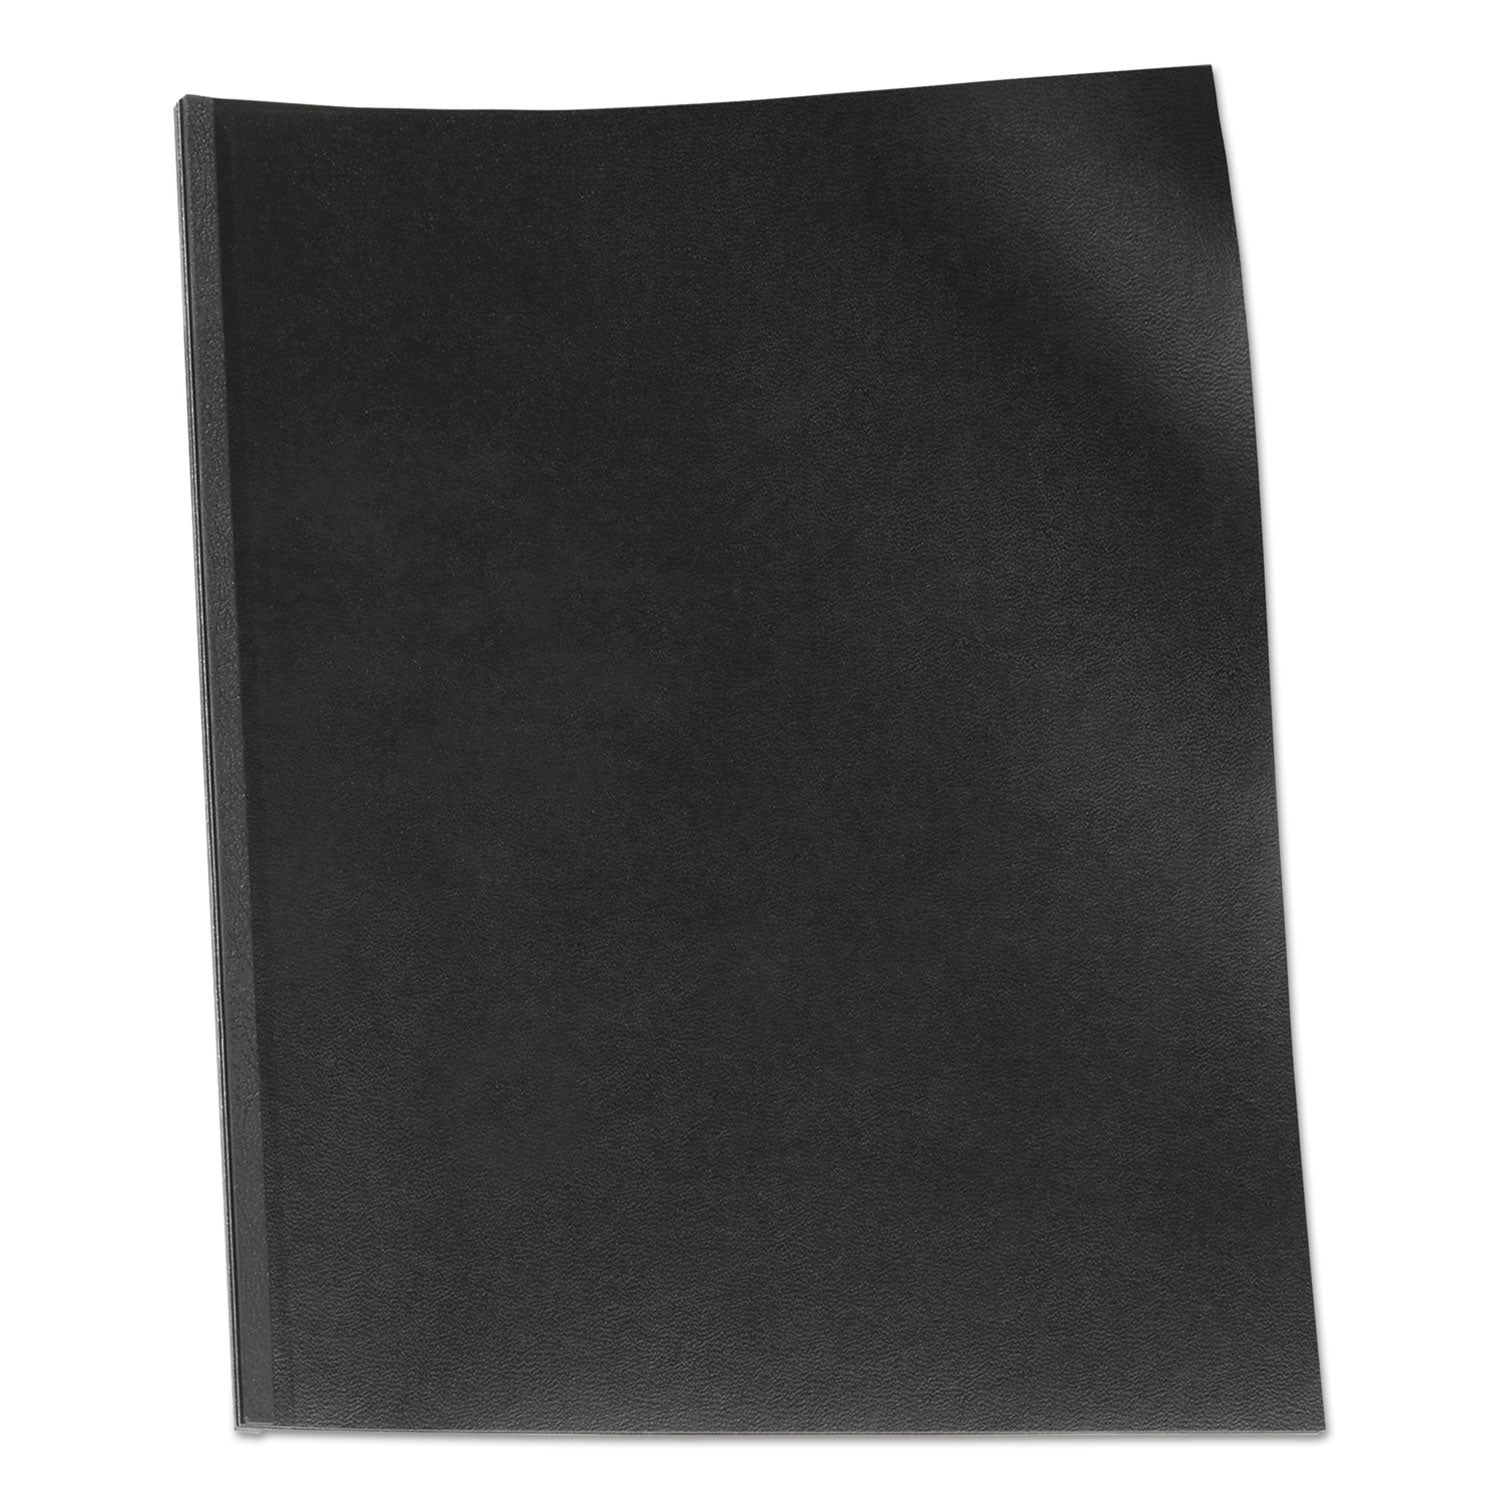 velobind-presentation-covers-black-11-x-85-punched-&-scored-50-pack_gbc9742230 - 1